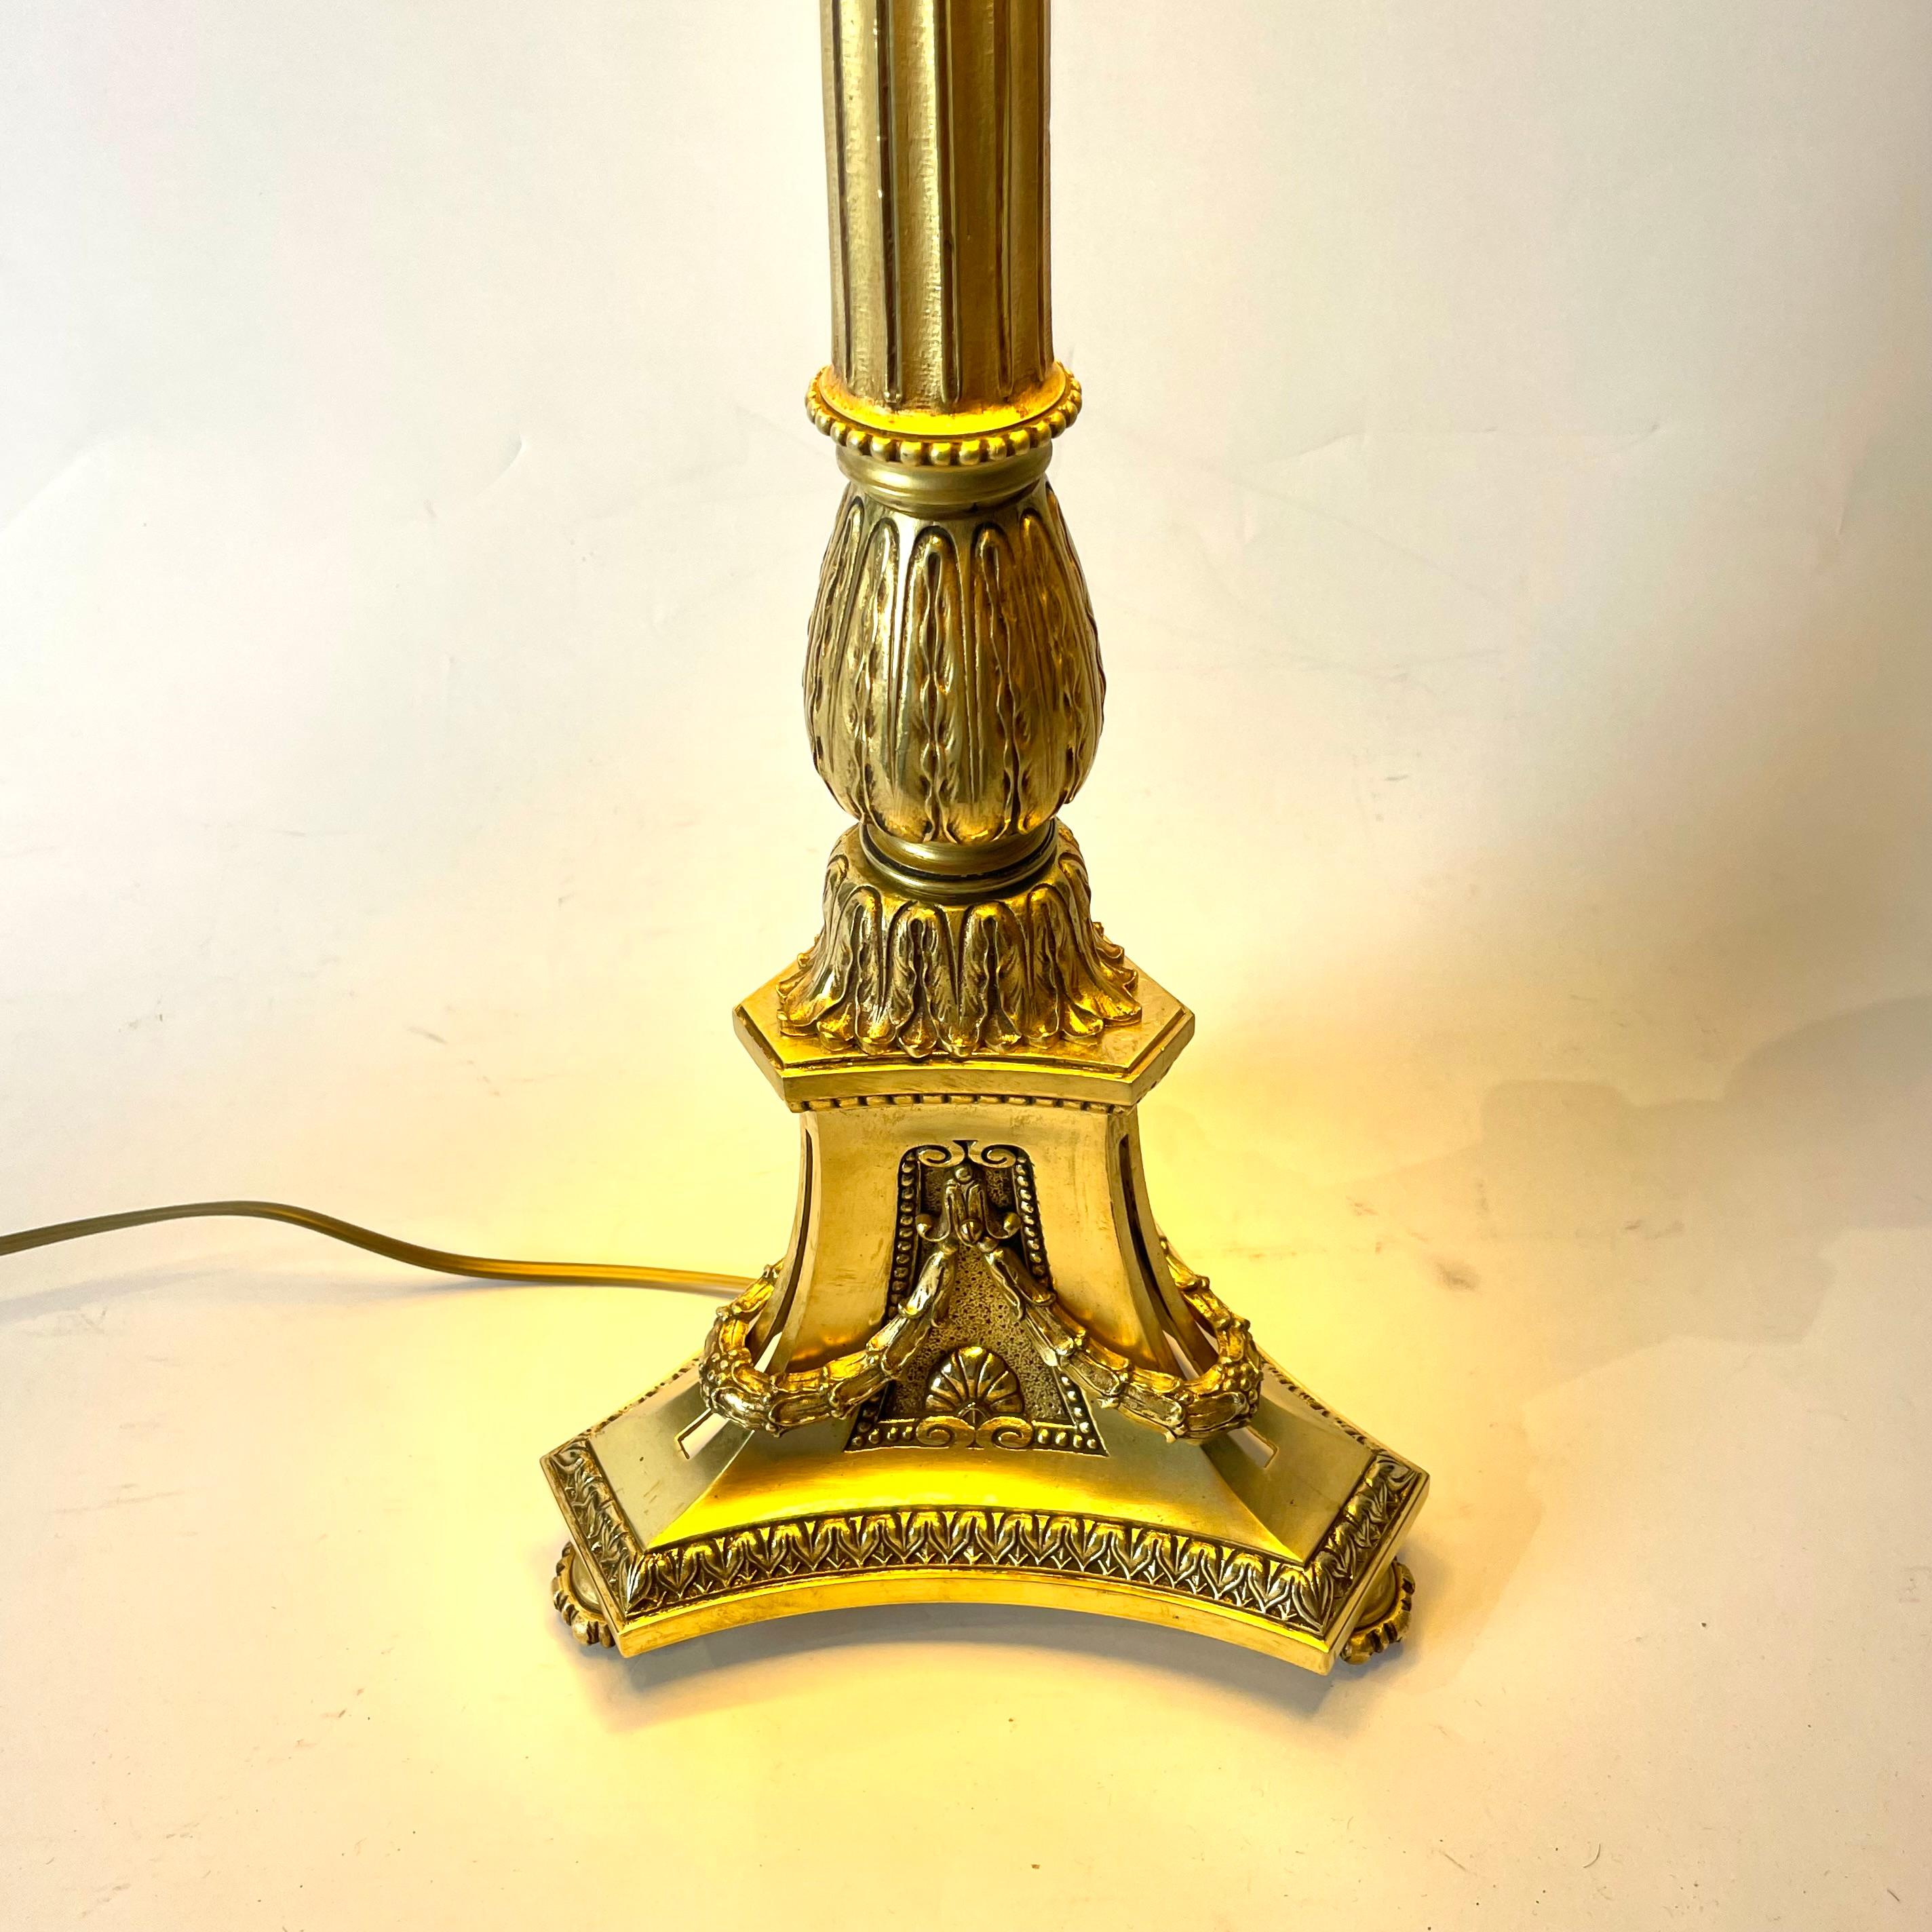 European Elegant Large Table Lamp Gilt Bronze in the style of LouisXVI Early 20th Century For Sale